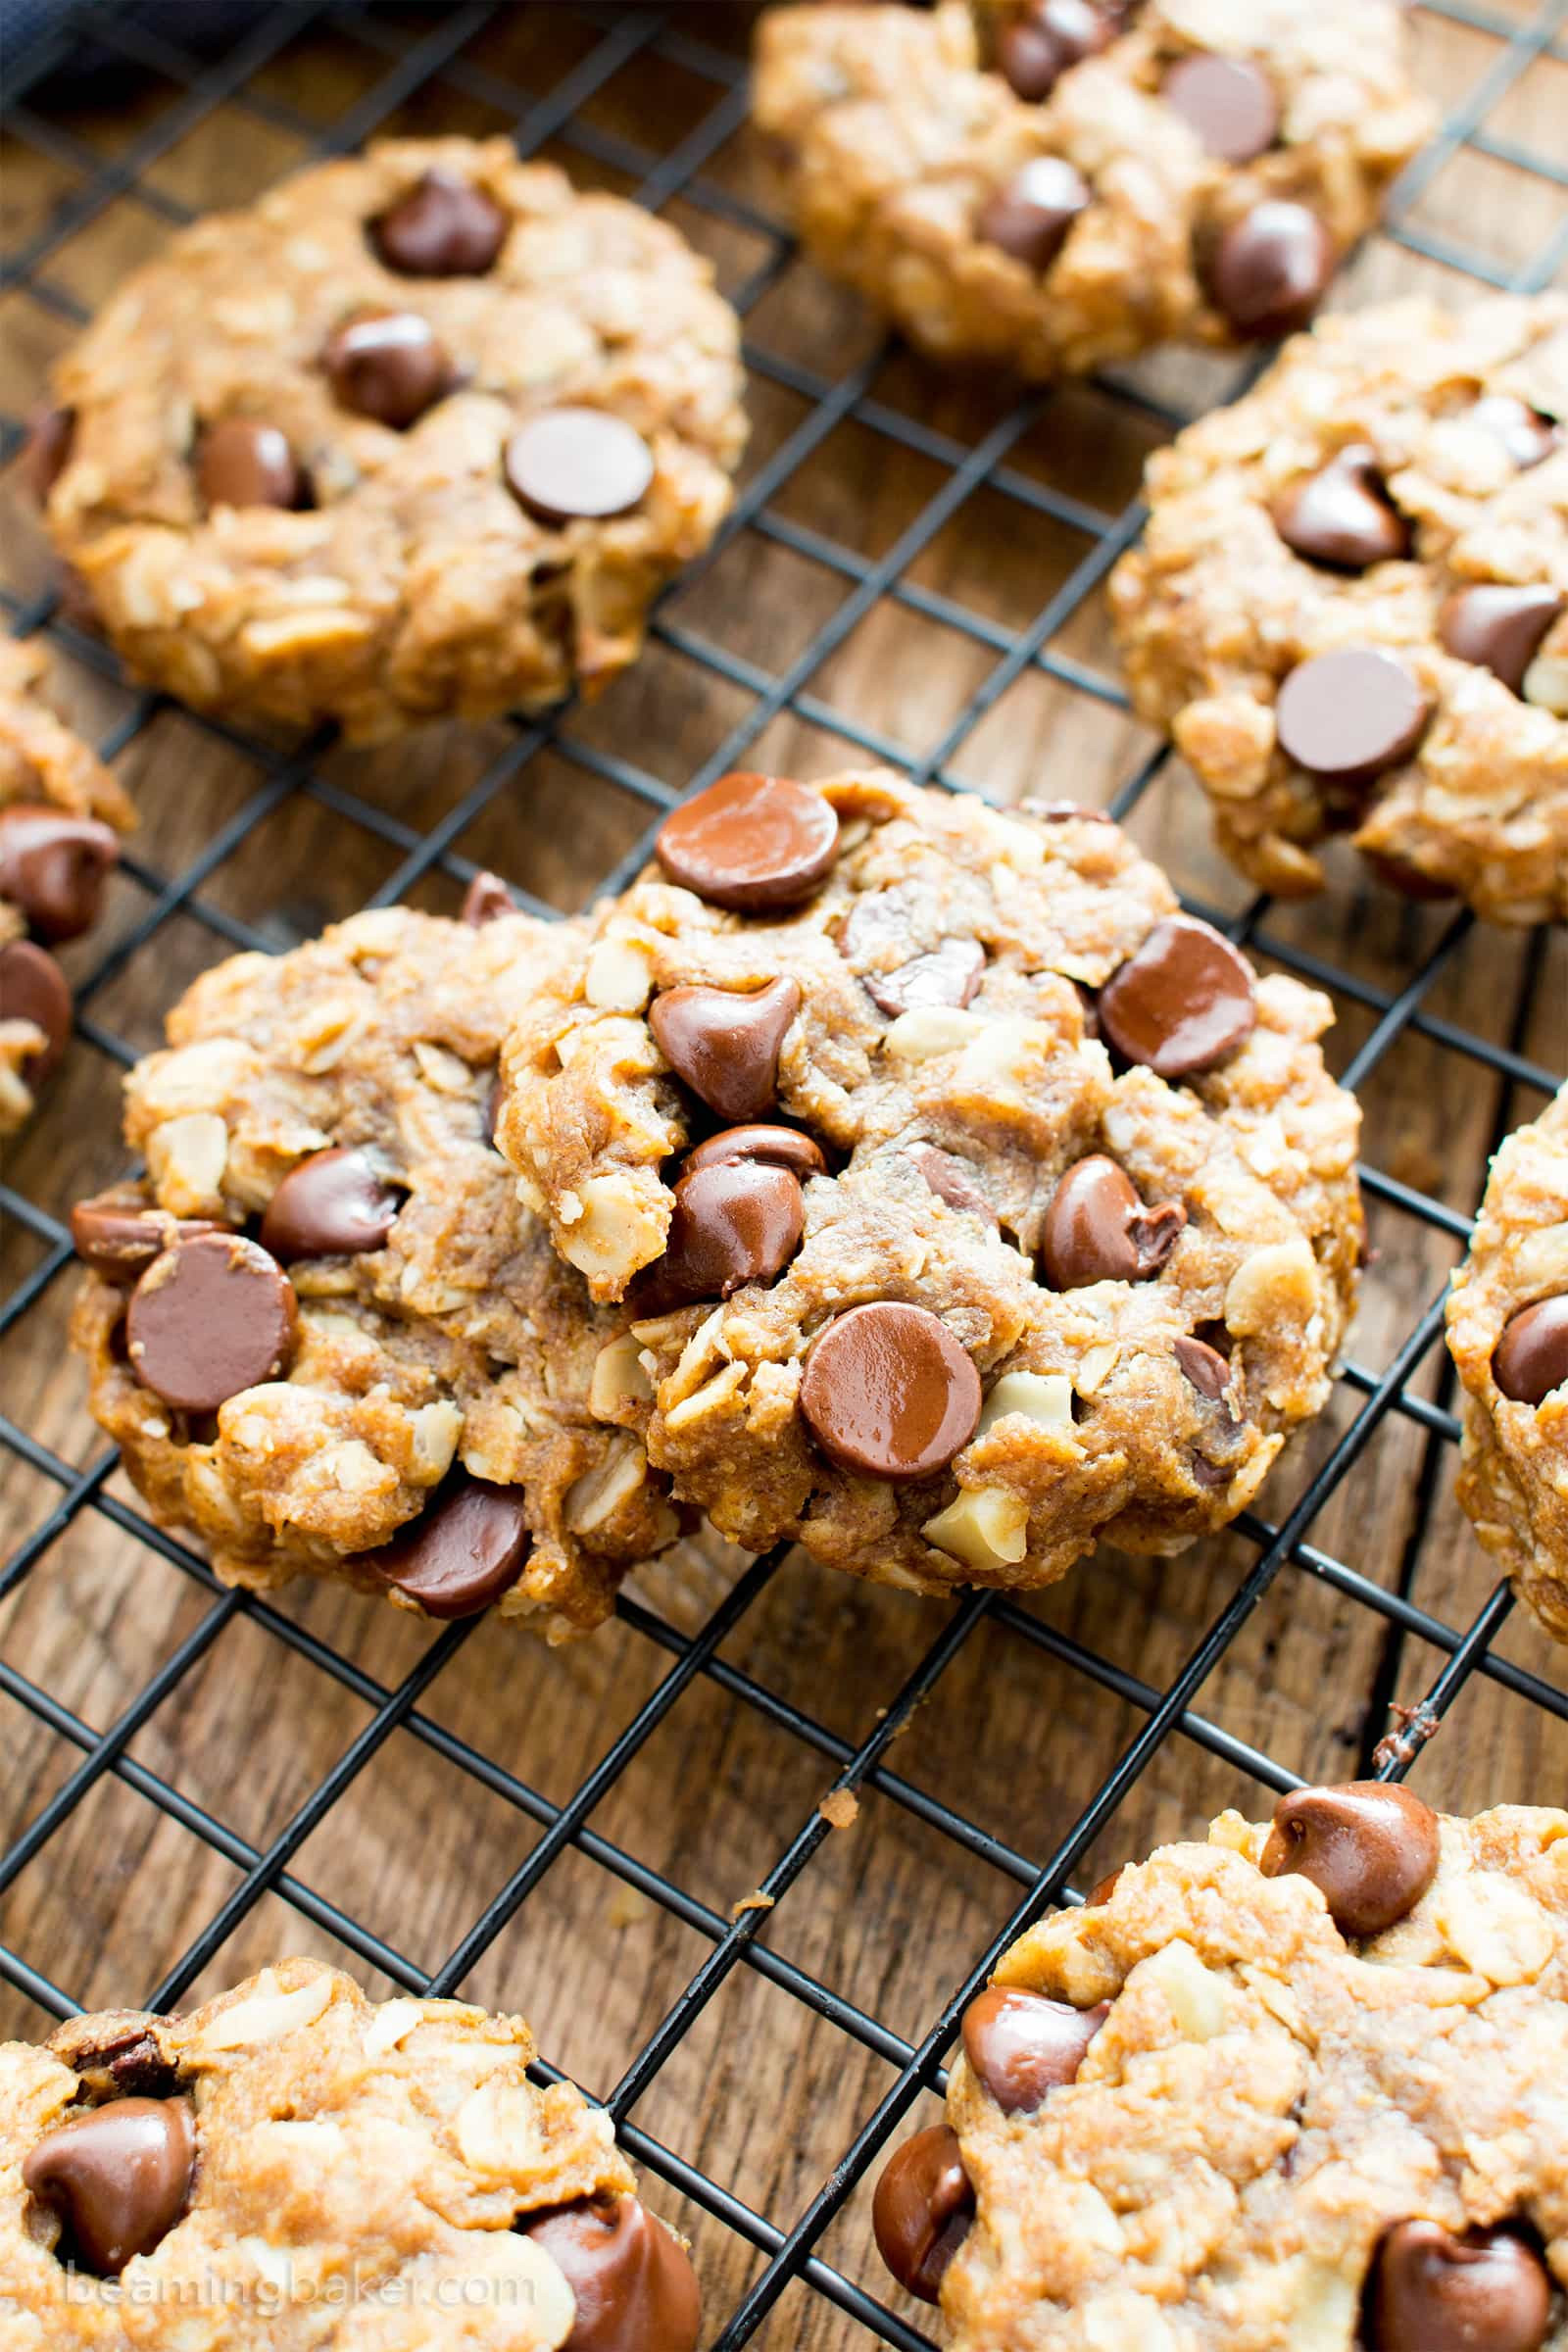 Dairy Free Peanut Butter Cookies
 Easy Gluten Free Peanut Butter Chocolate Chip Oatmeal